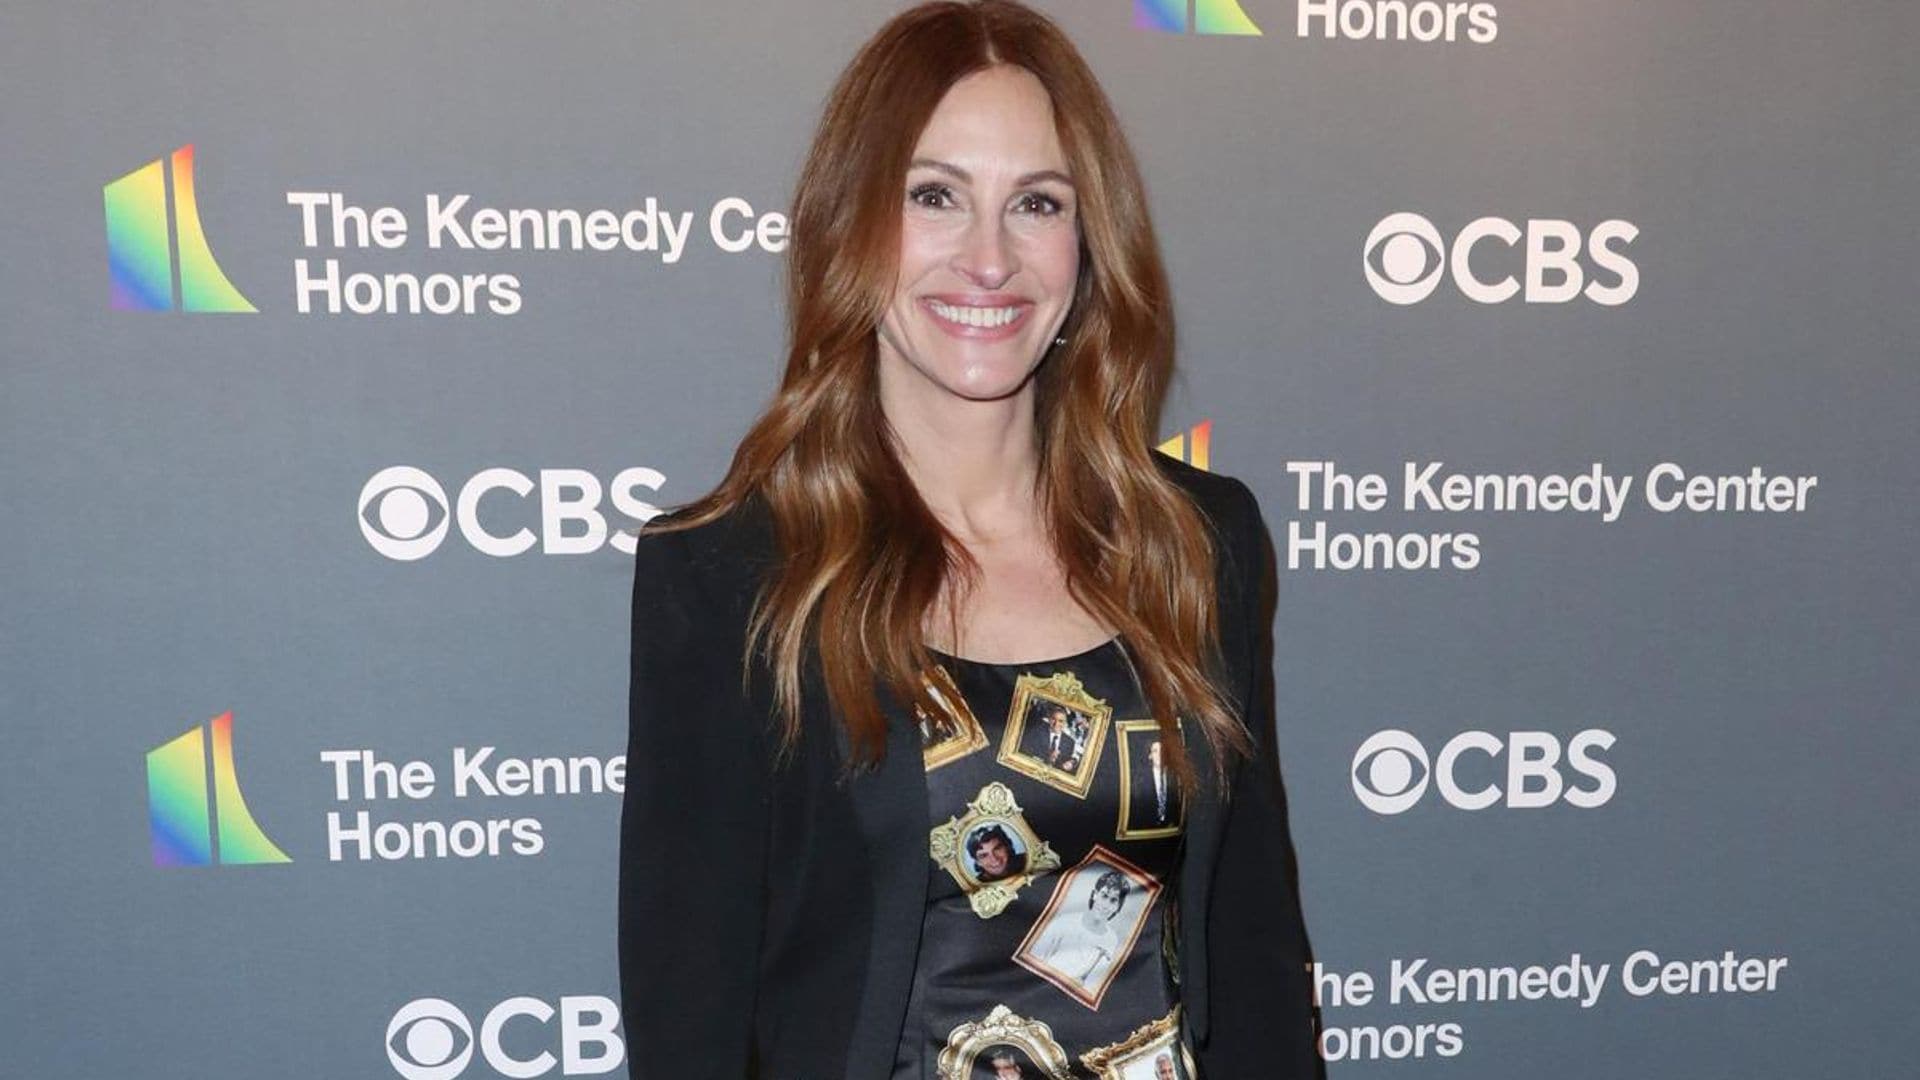 Julia Roberts wears dress with George Clooney’s face on it